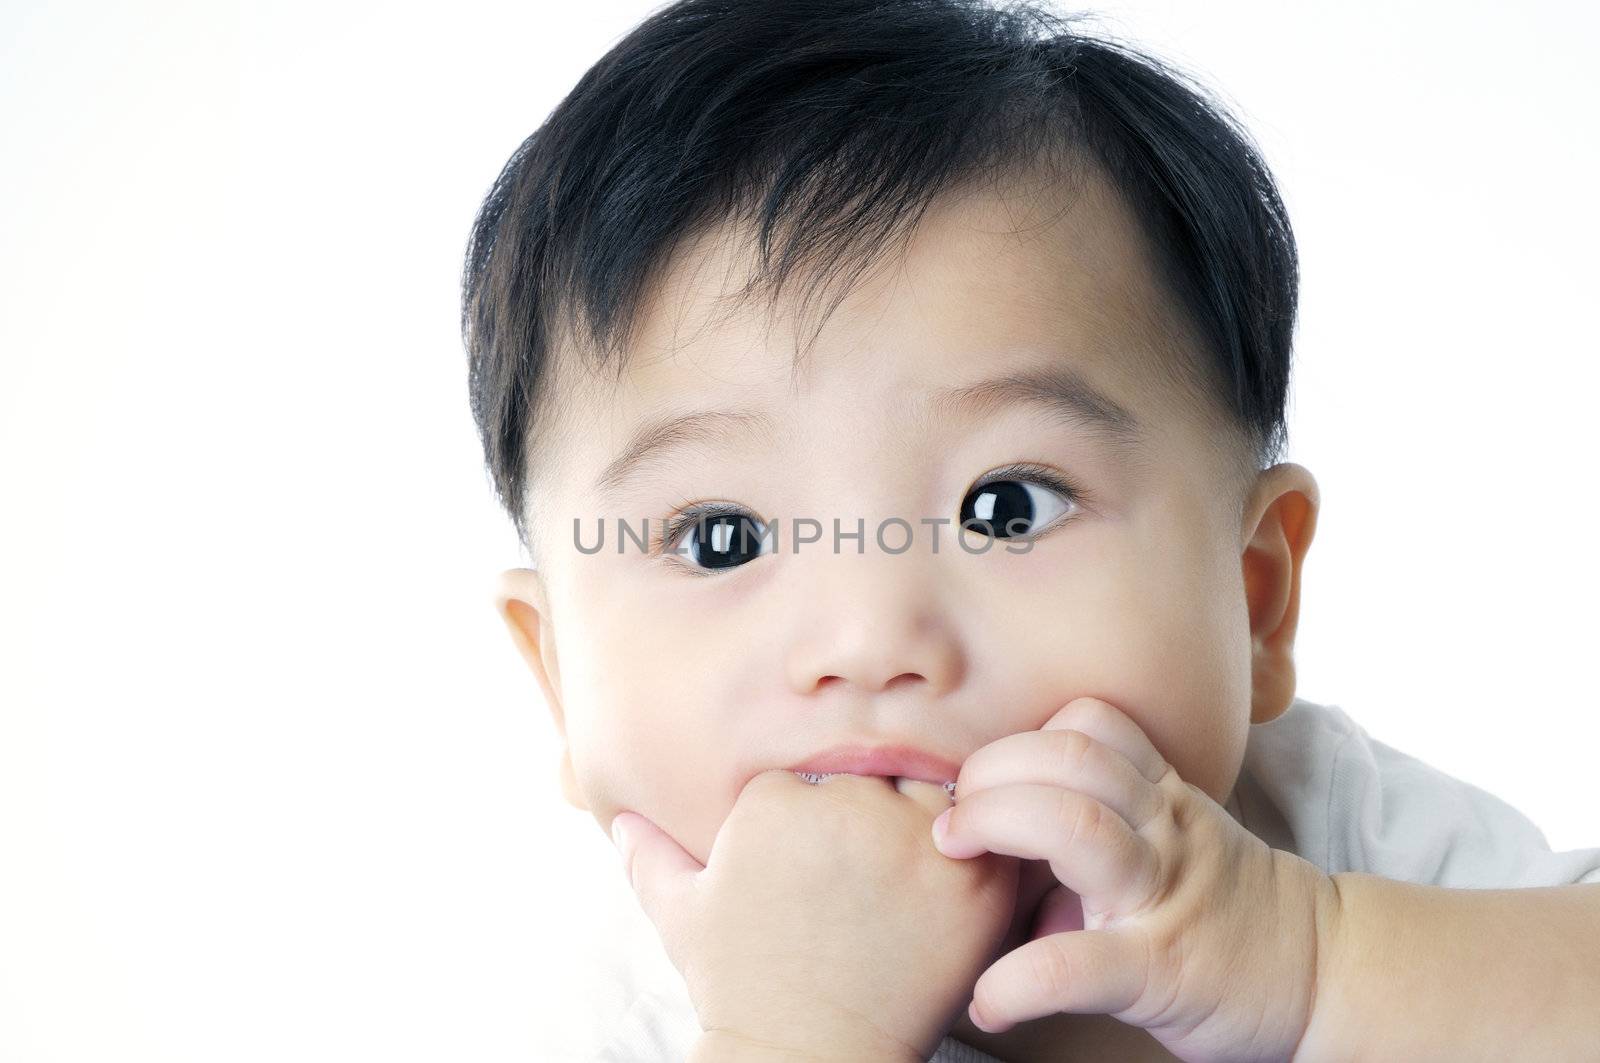 Closeup portrait of an adorable infant baby sucking his hand over white background.